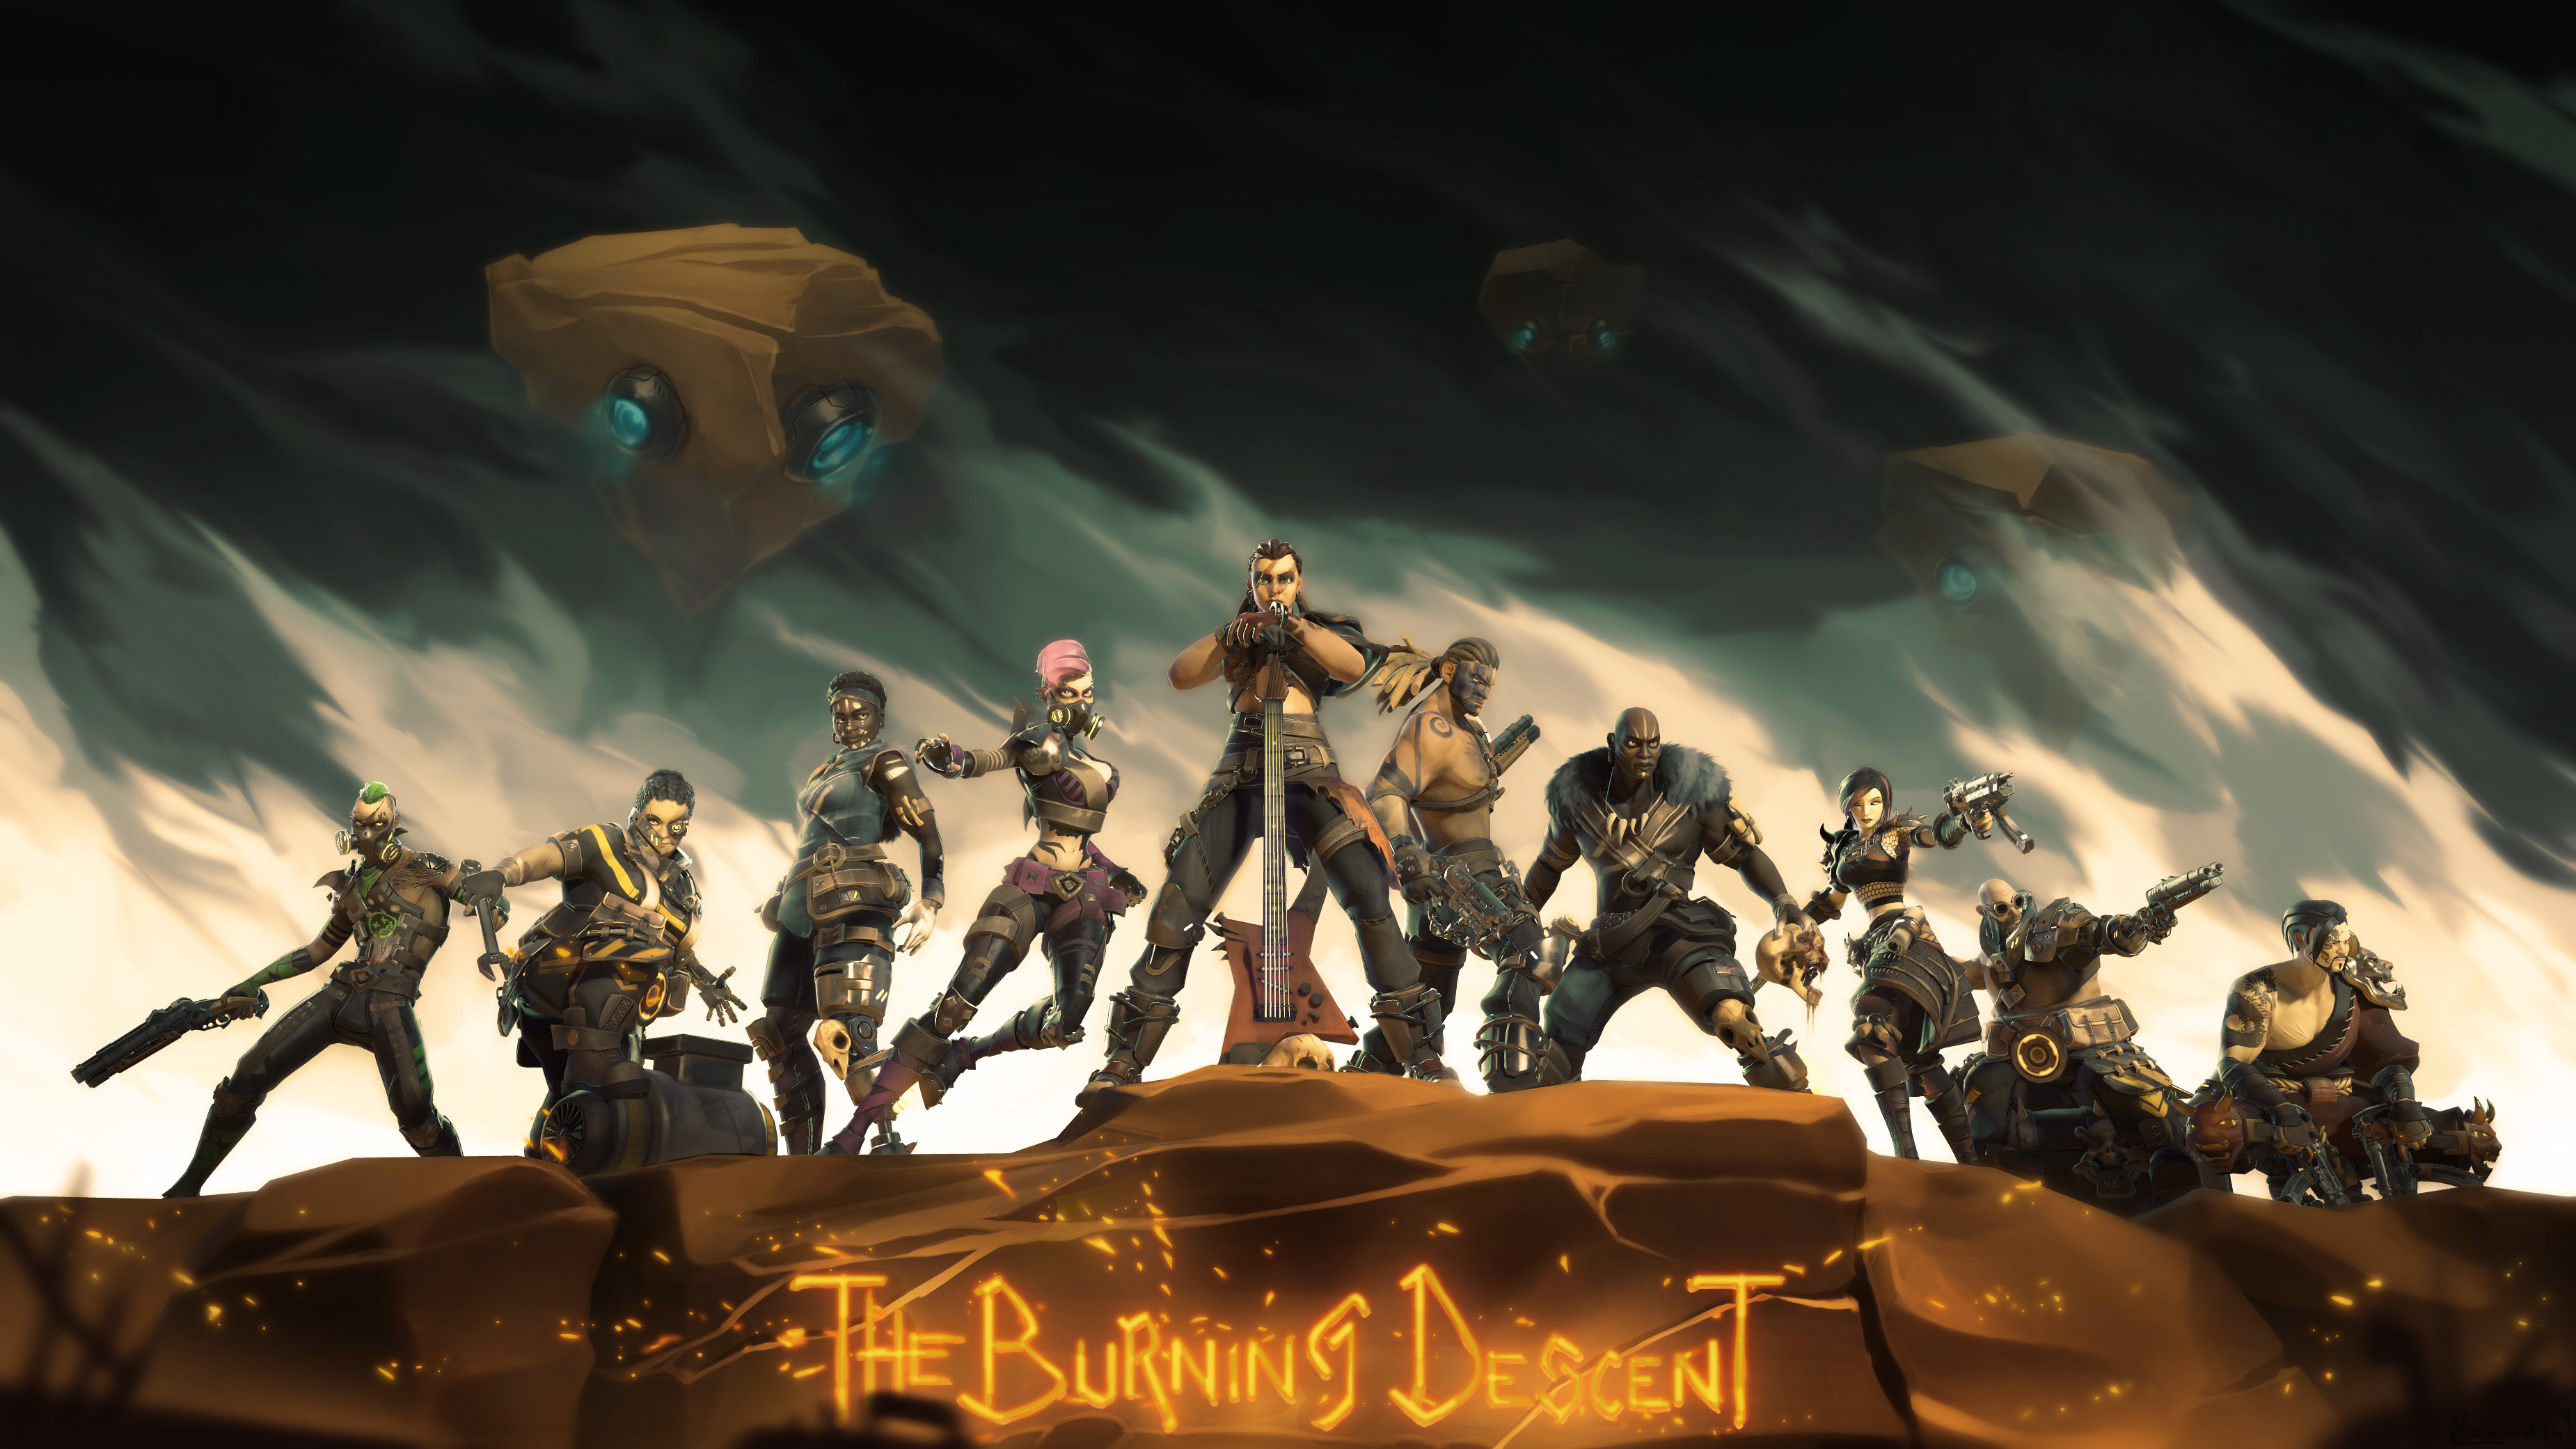 The Burning Descent  - Character's LineUp. Posing made with Akeytsu, whole image polished with Photoshop